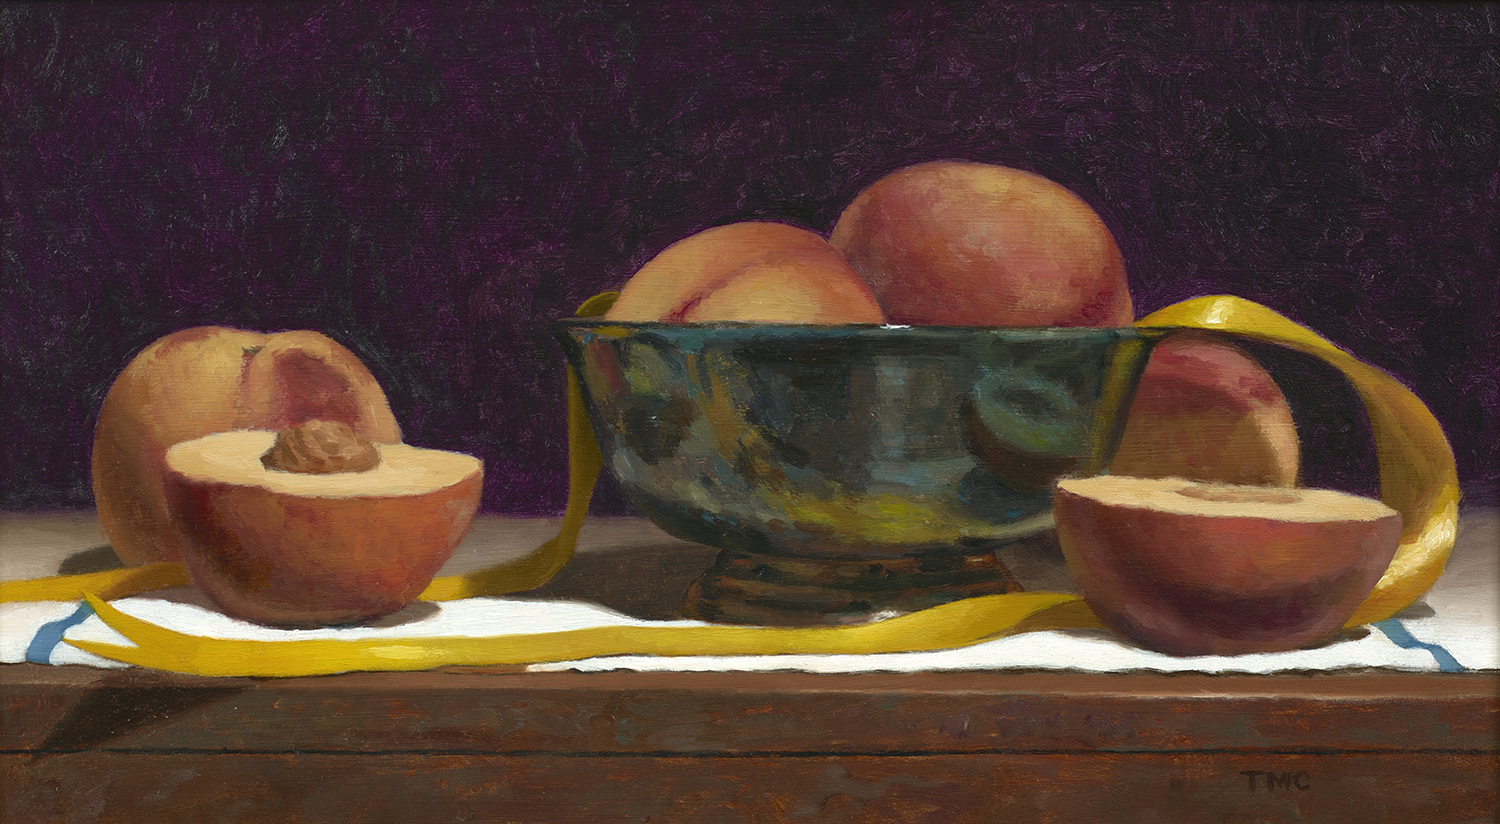 todd_casey_tc1250_silver_bowl_with_peaches.jpg